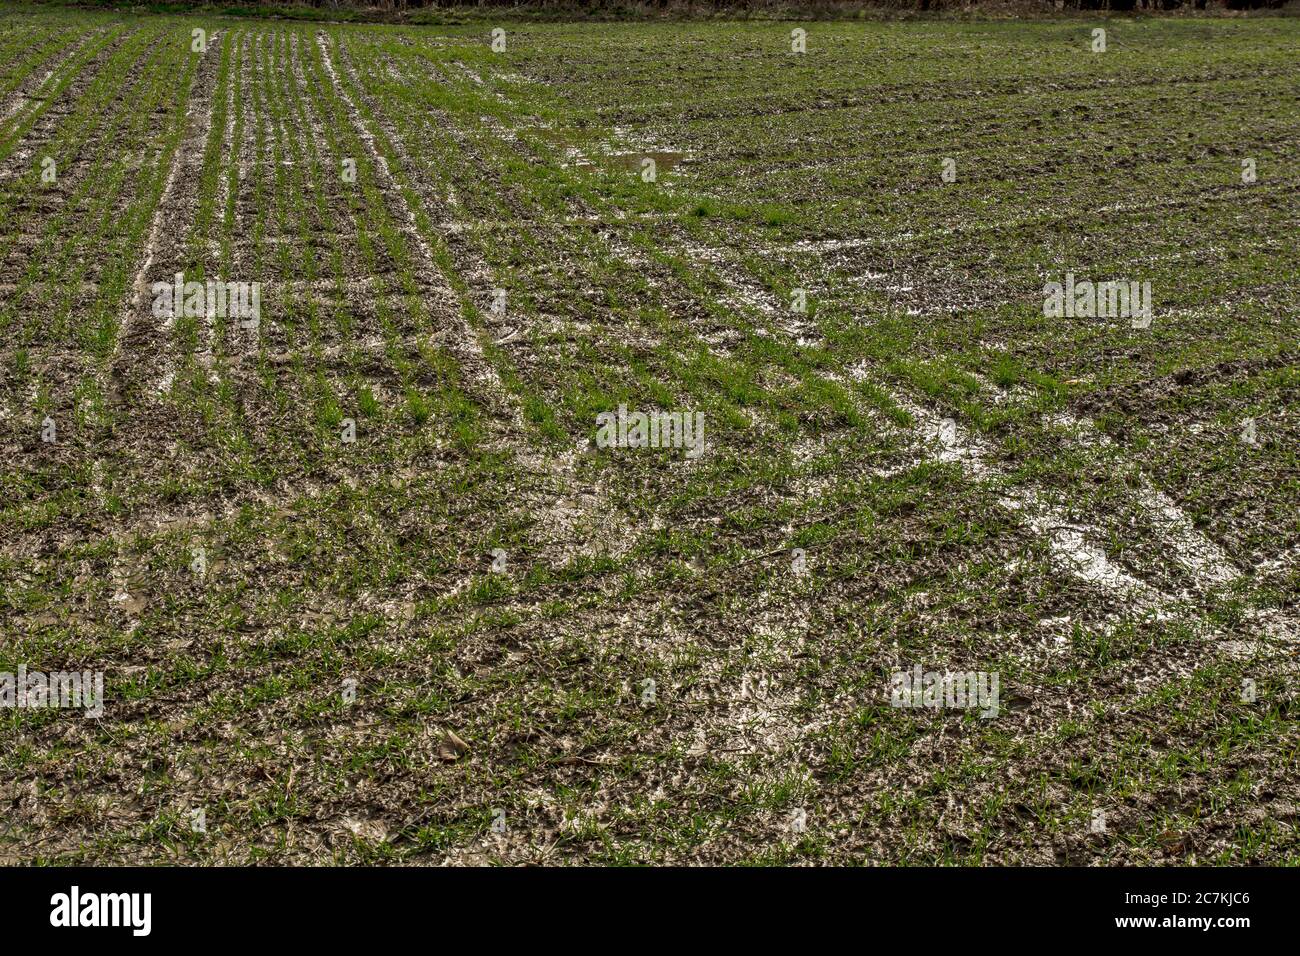 A field under a crop that has just emerged full of water after heavy rain. Black clouds announce more rain.. Stock Photo